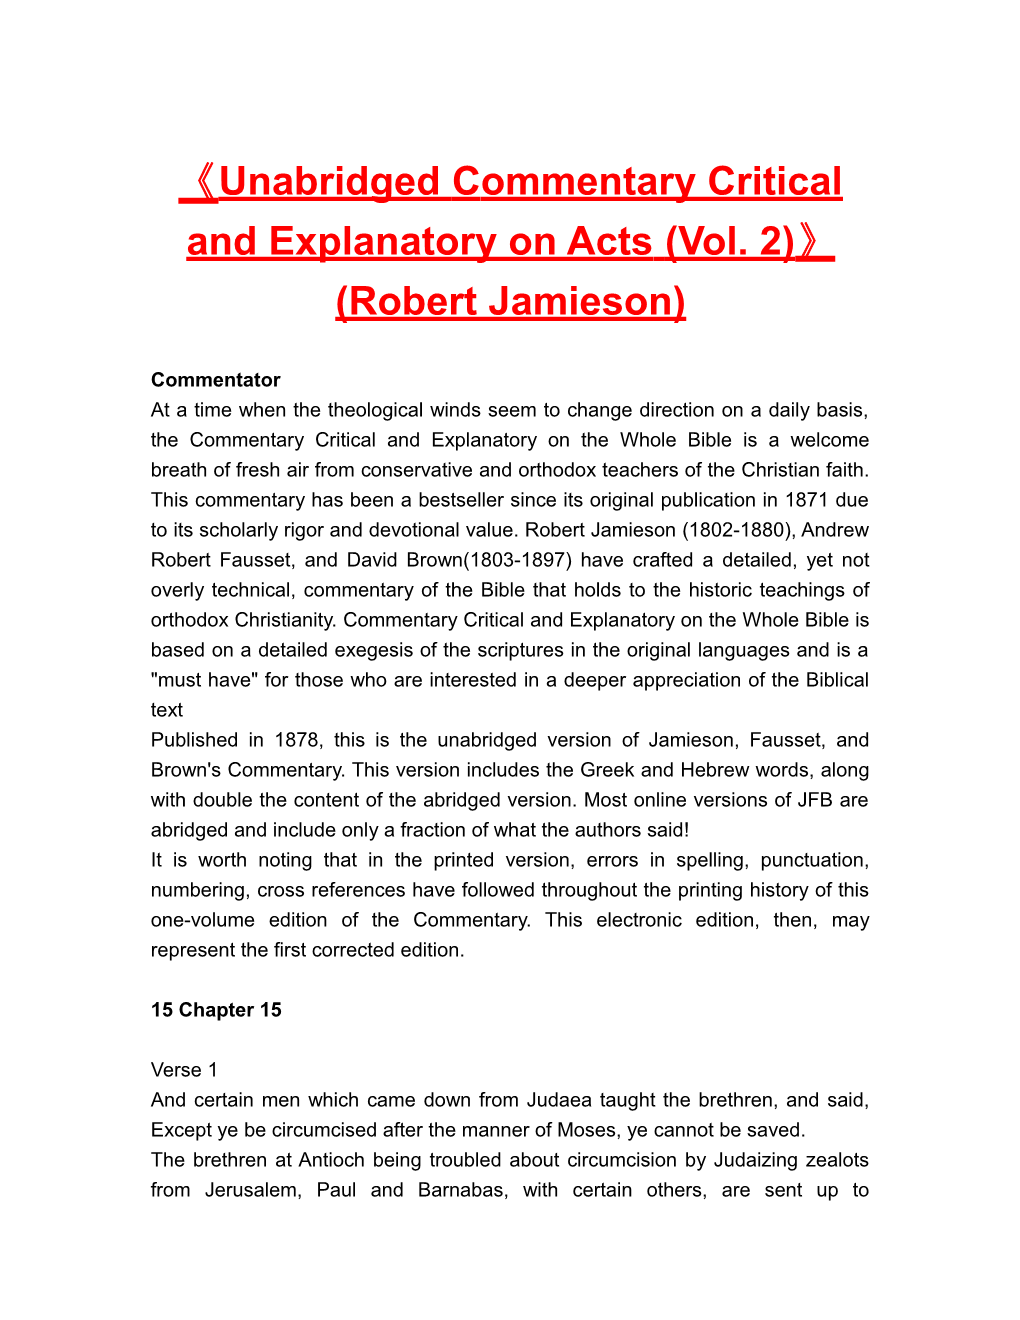 Unabridged Commentary Critical and Explanatory on Acts (Vol. 2) (Robert Jamieson)